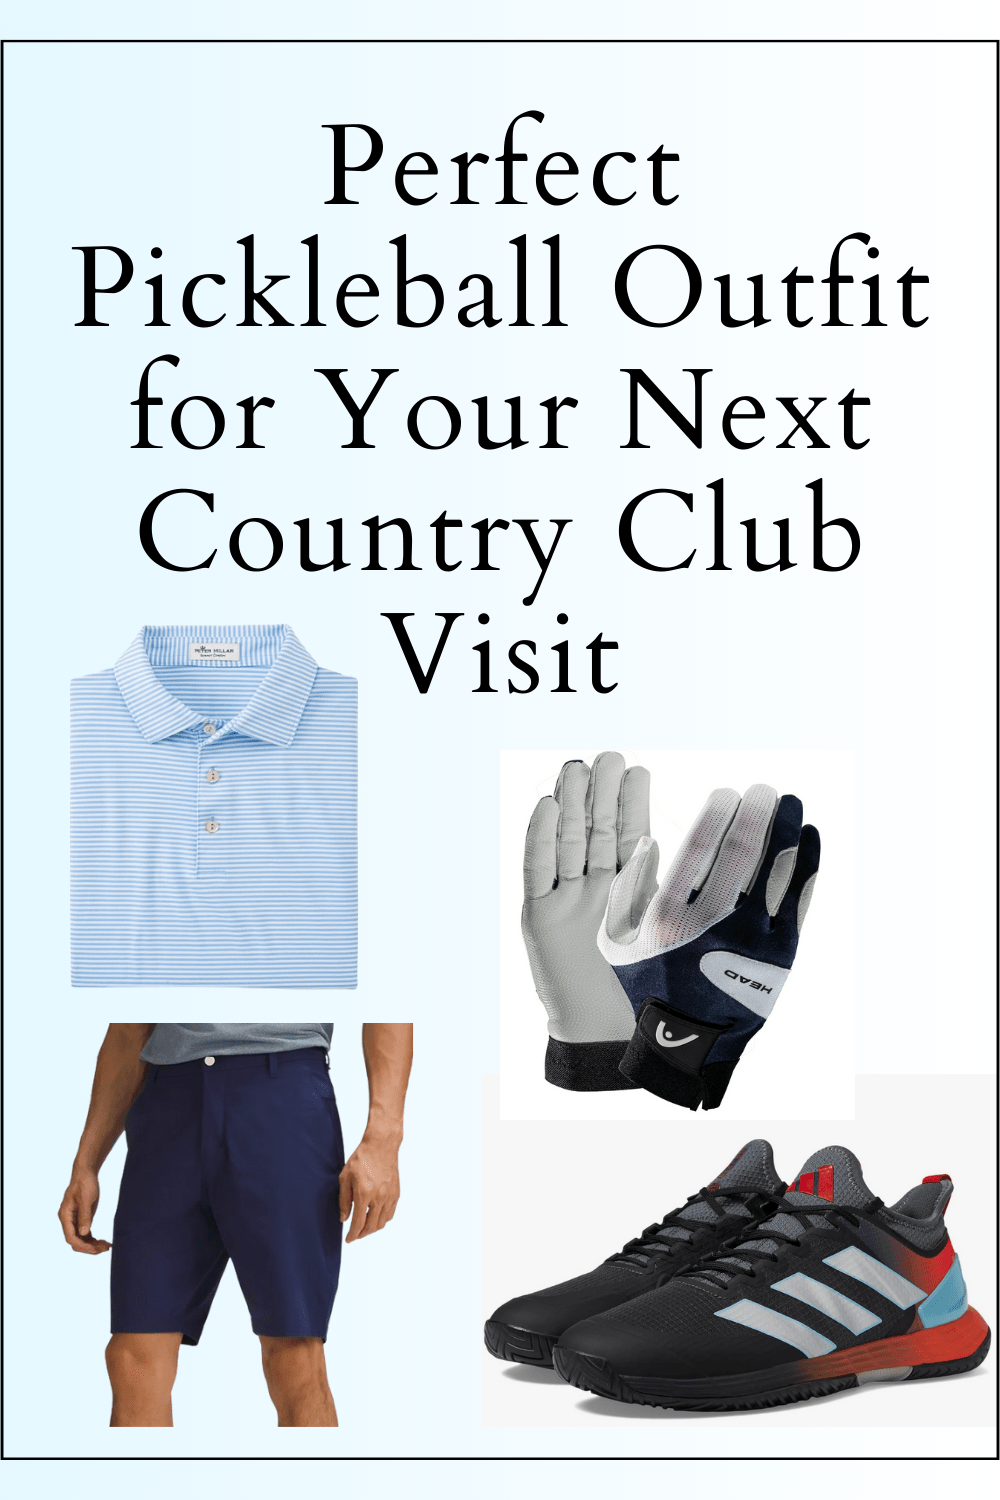 Country club outfits: Dress code and ideas on what to wear with